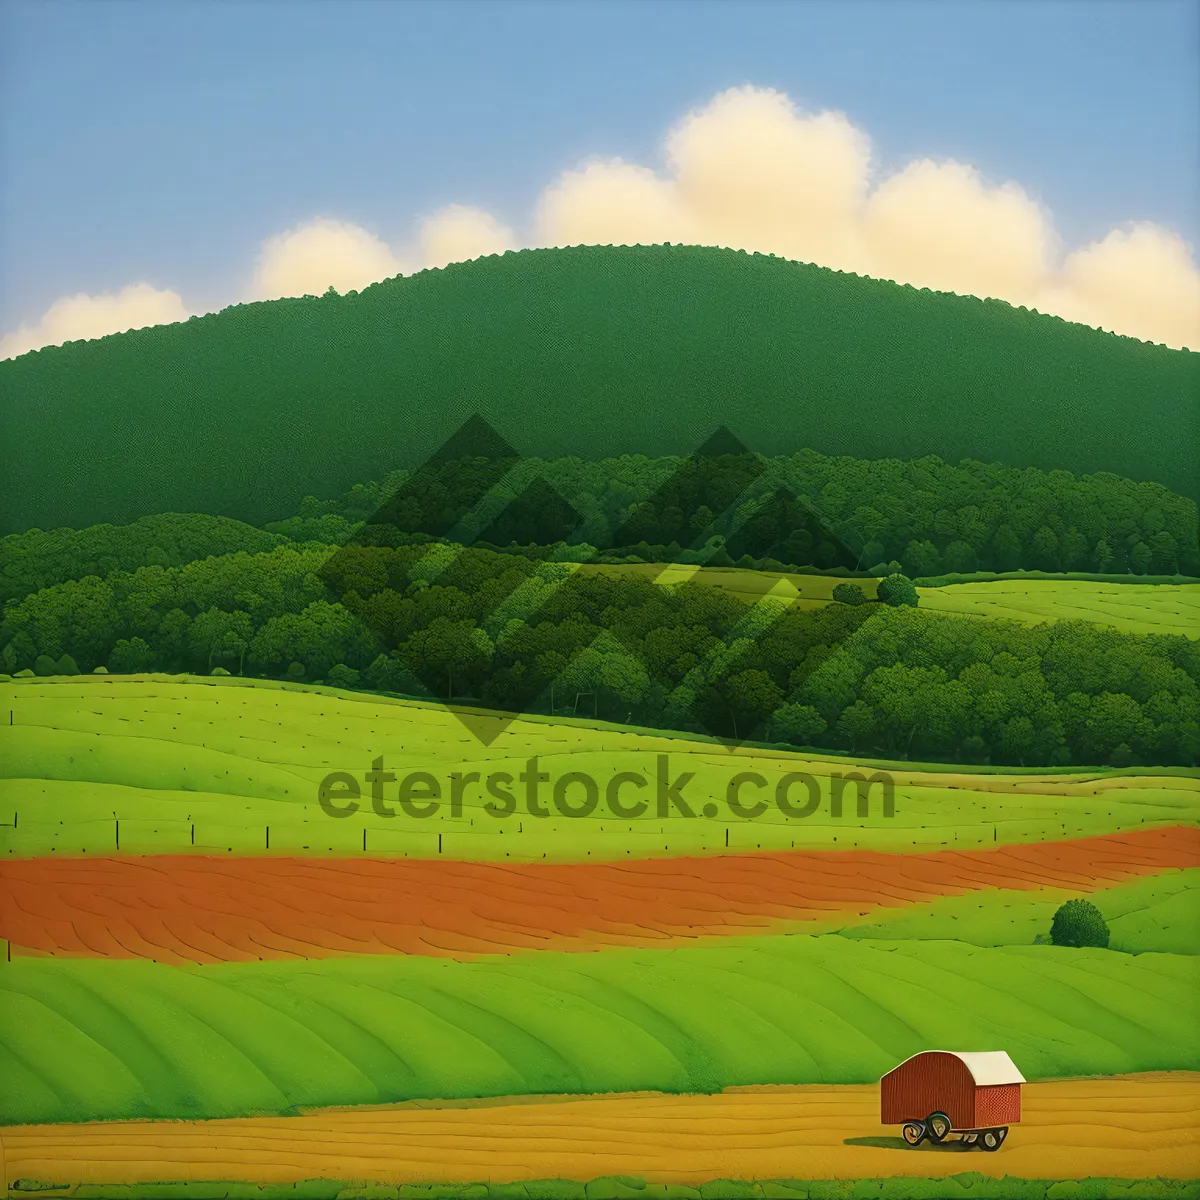 Picture of Sunny Baseball Field on Rolling Green Landscape